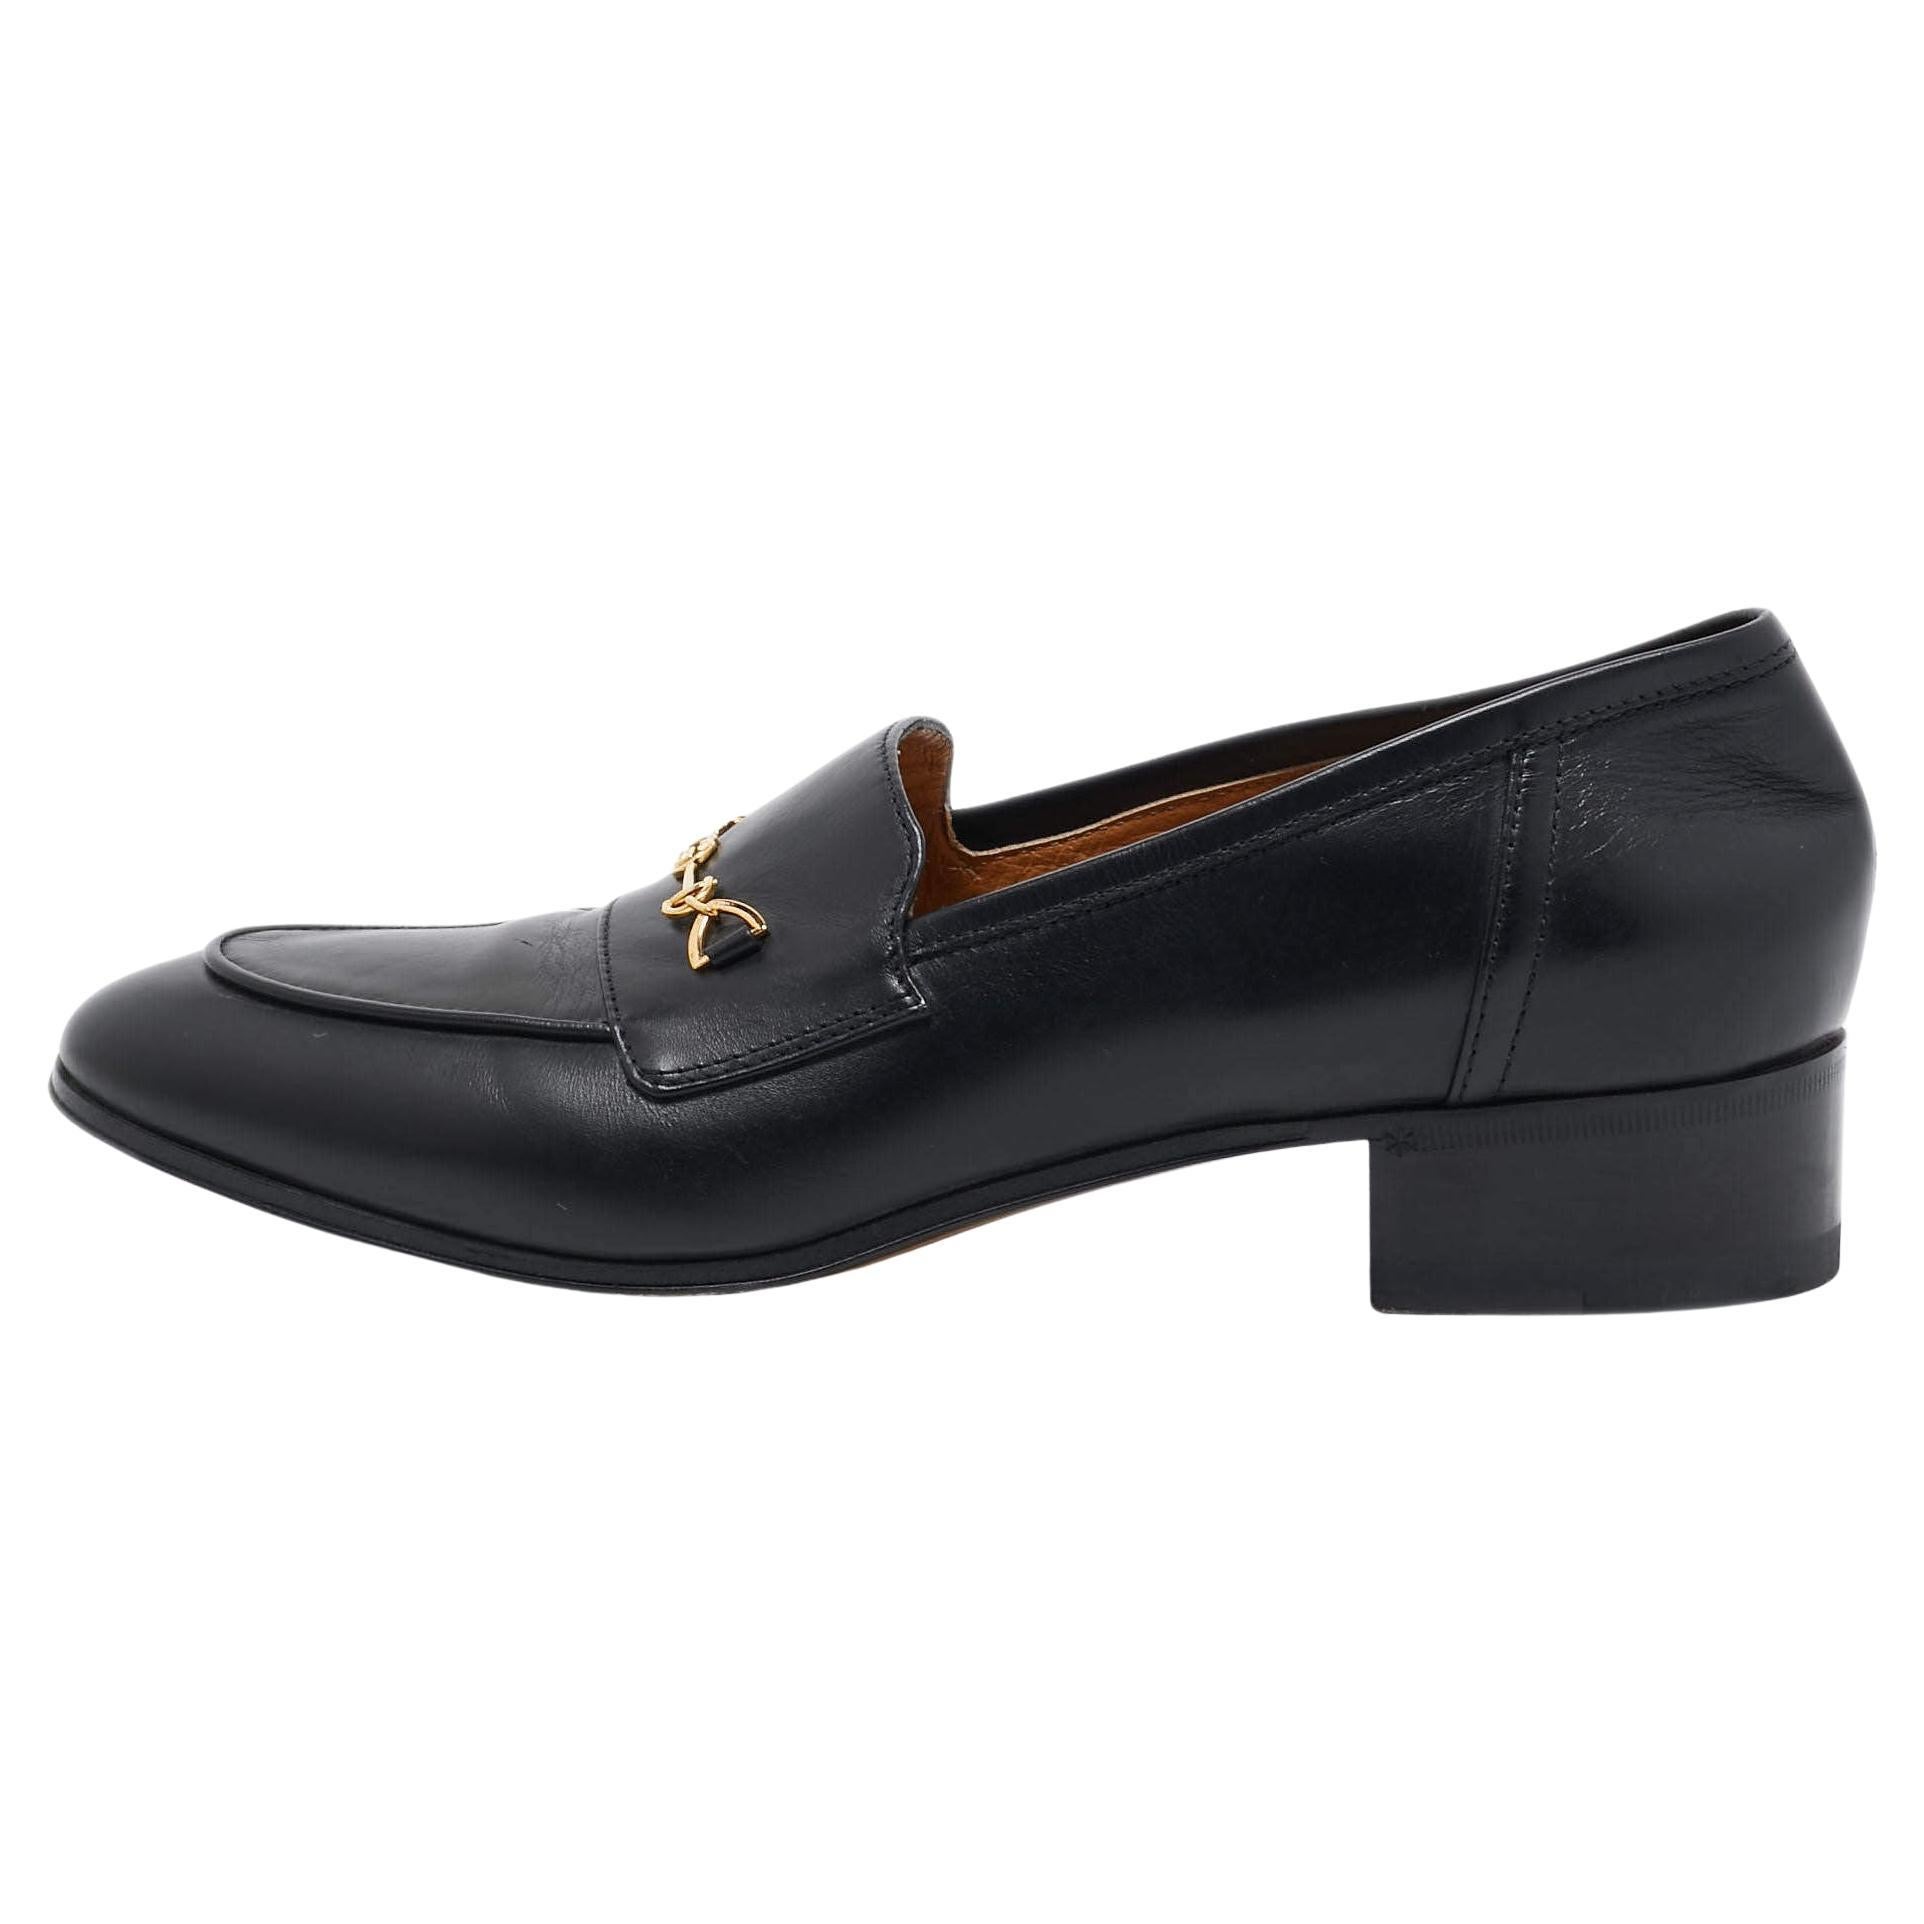 Gucci Black Leather Horsebit Loafers Size 39